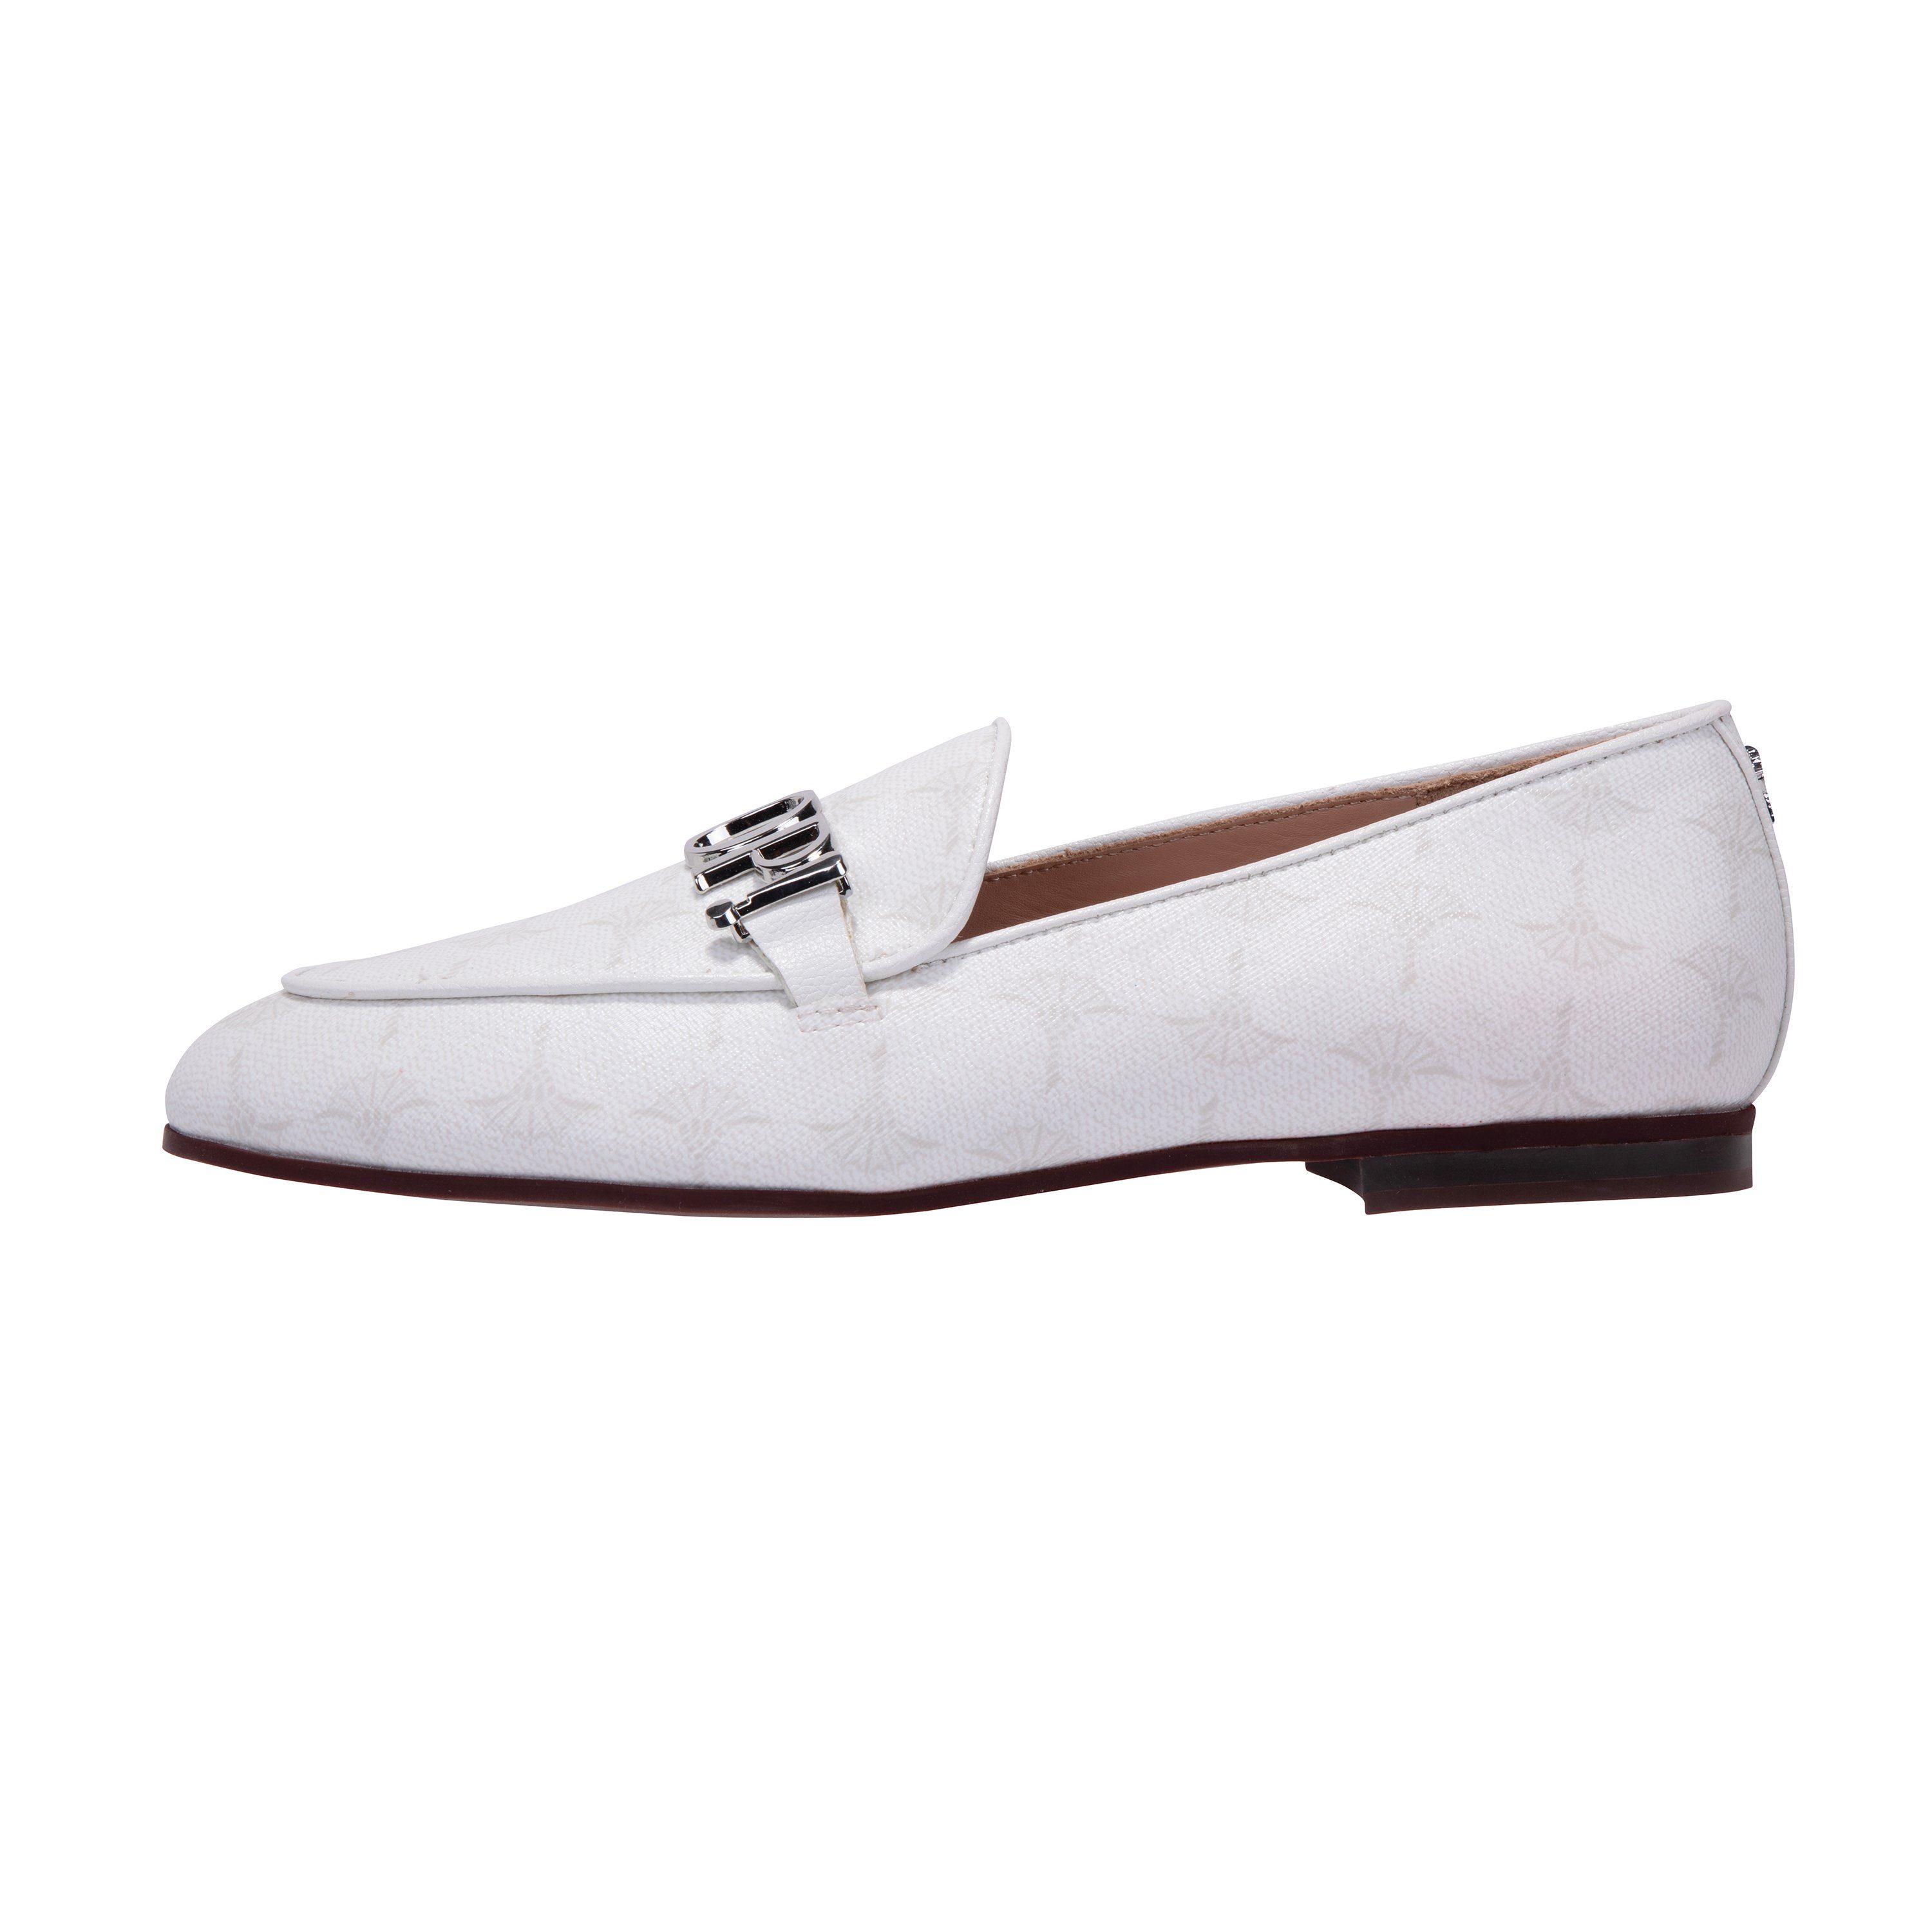 outer: offwhite Joop! Slipper inner: synthetic, microfibre